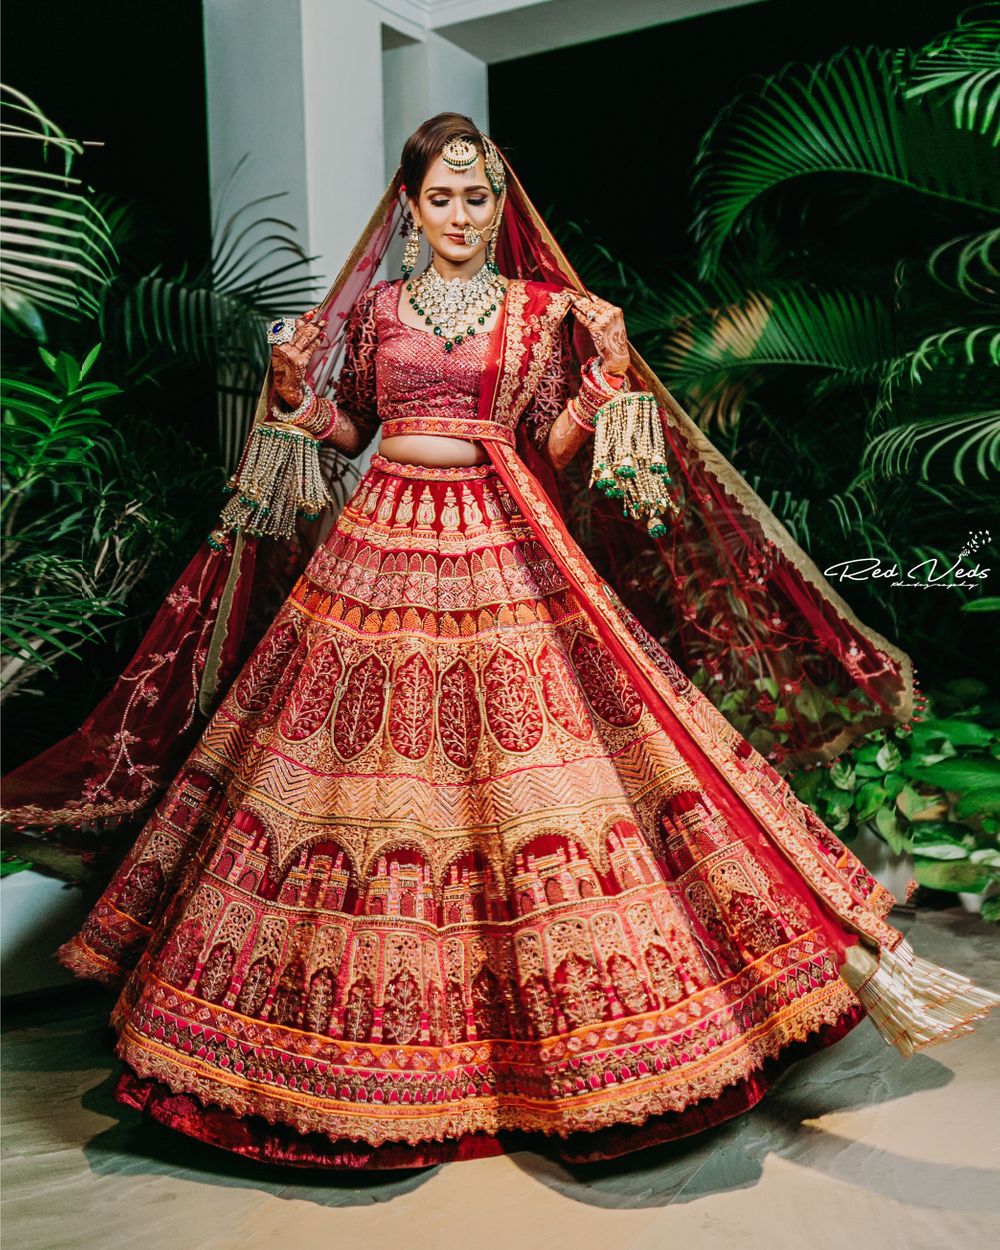 Photo of unique bridal lehenga with offbeat embroidery